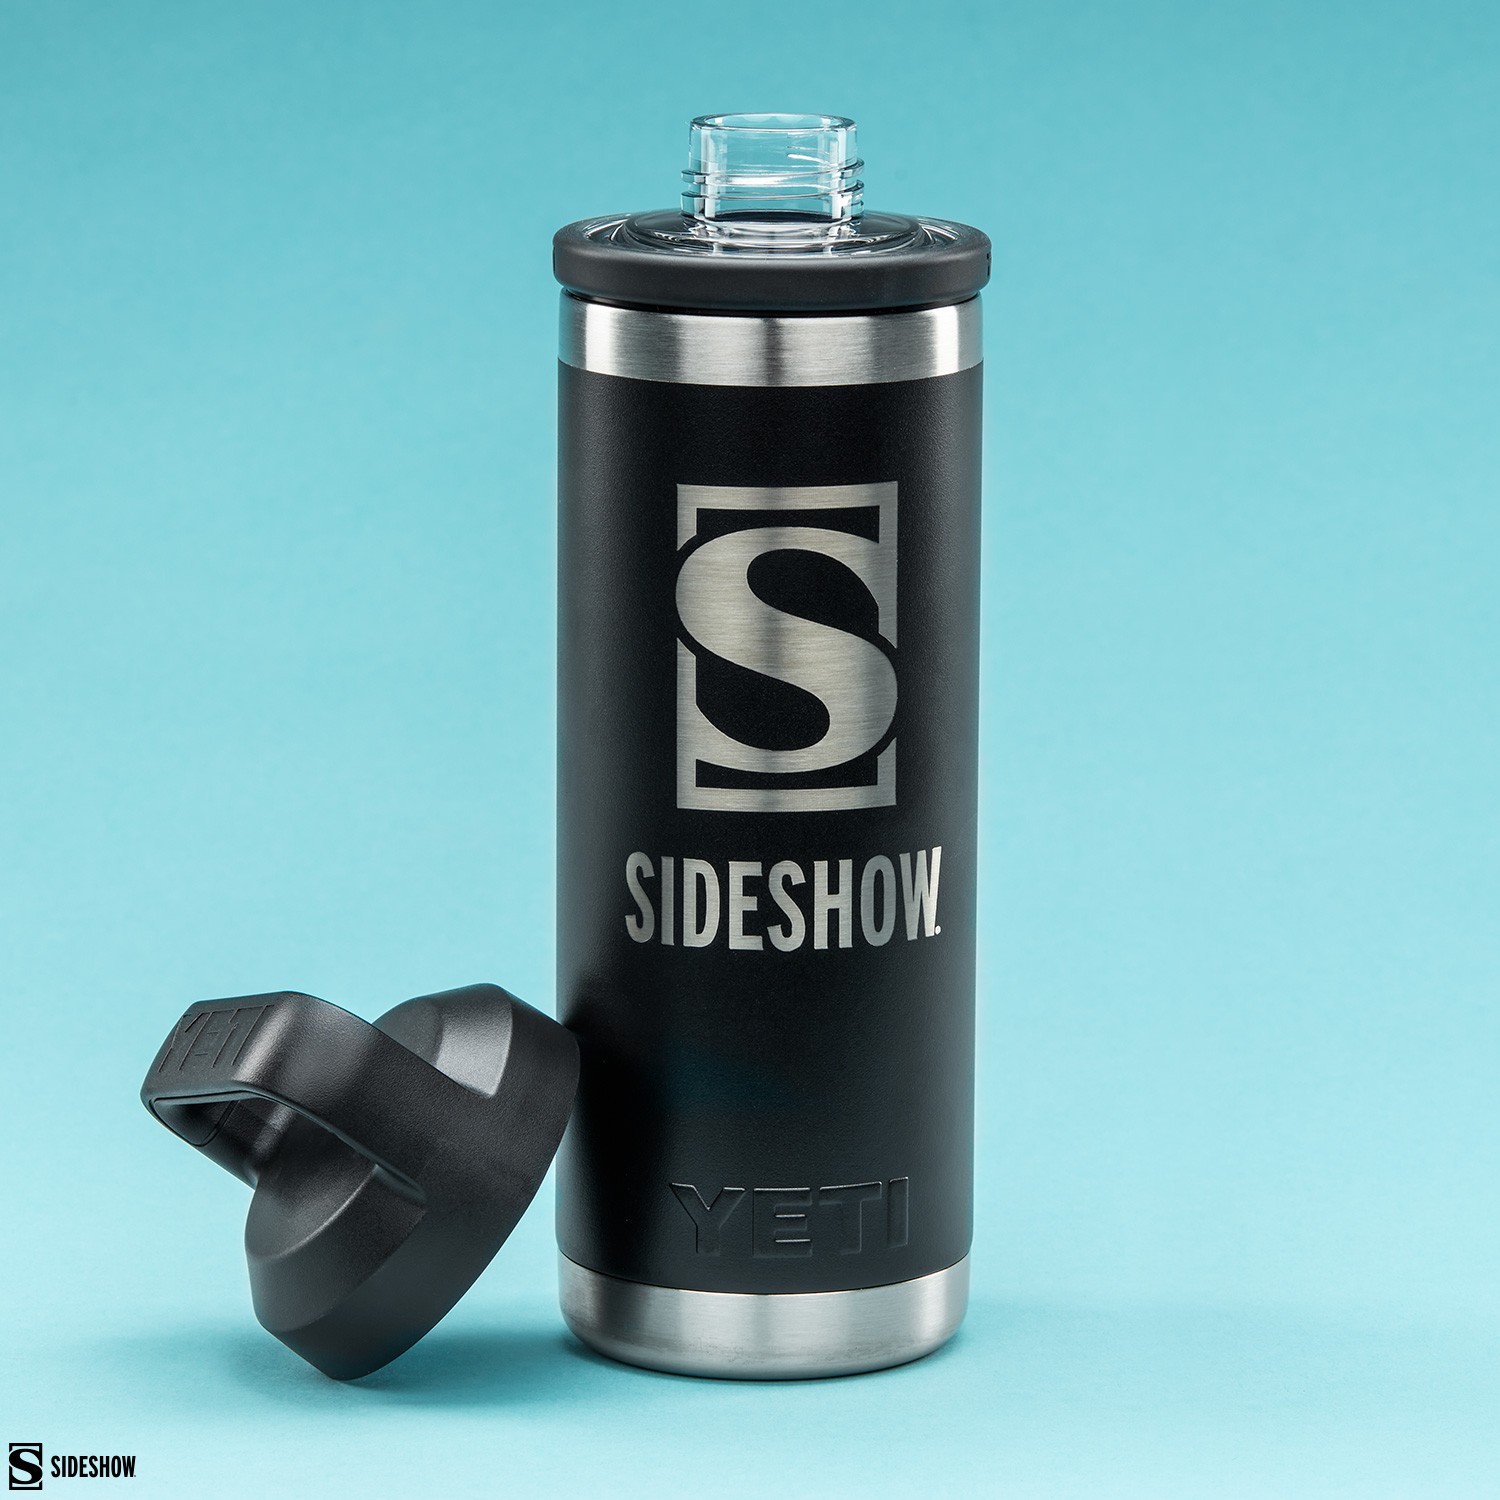 https://www.sideshow.com/cdn-cgi/image/quality=90,f=auto/https://www.sideshow.com/storage/product-images/502320/sideshow-x-yeti-water-bottle_sideshow-collectibles_gallery_6557a9fd1d659.jpg